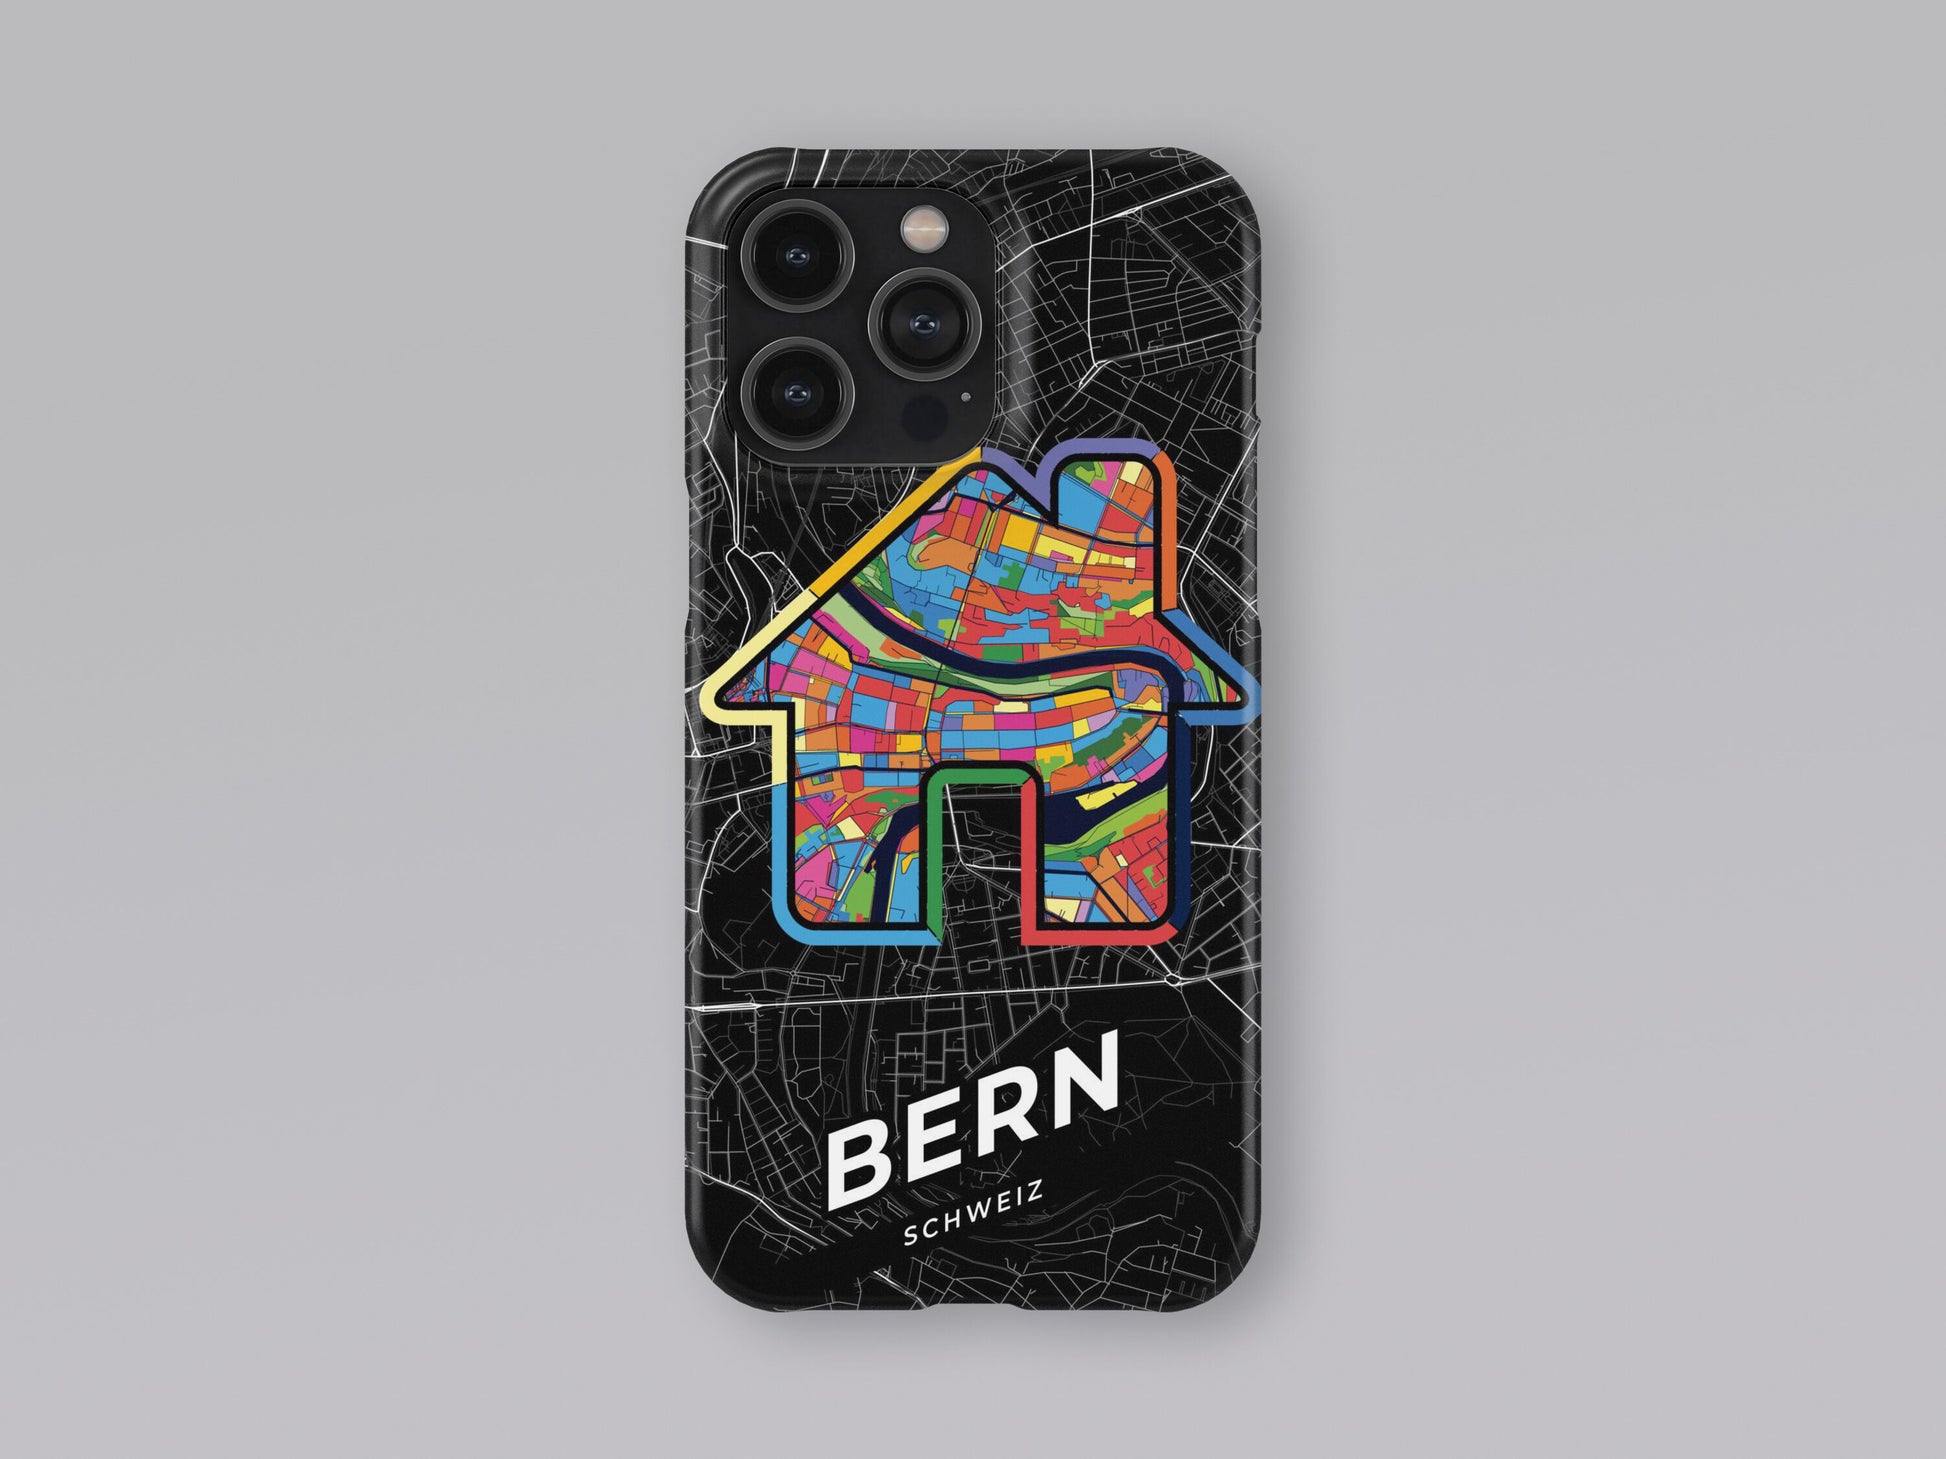 Bern Switzerland slim phone case with colorful icon. Birthday, wedding or housewarming gift. Couple match cases. 3